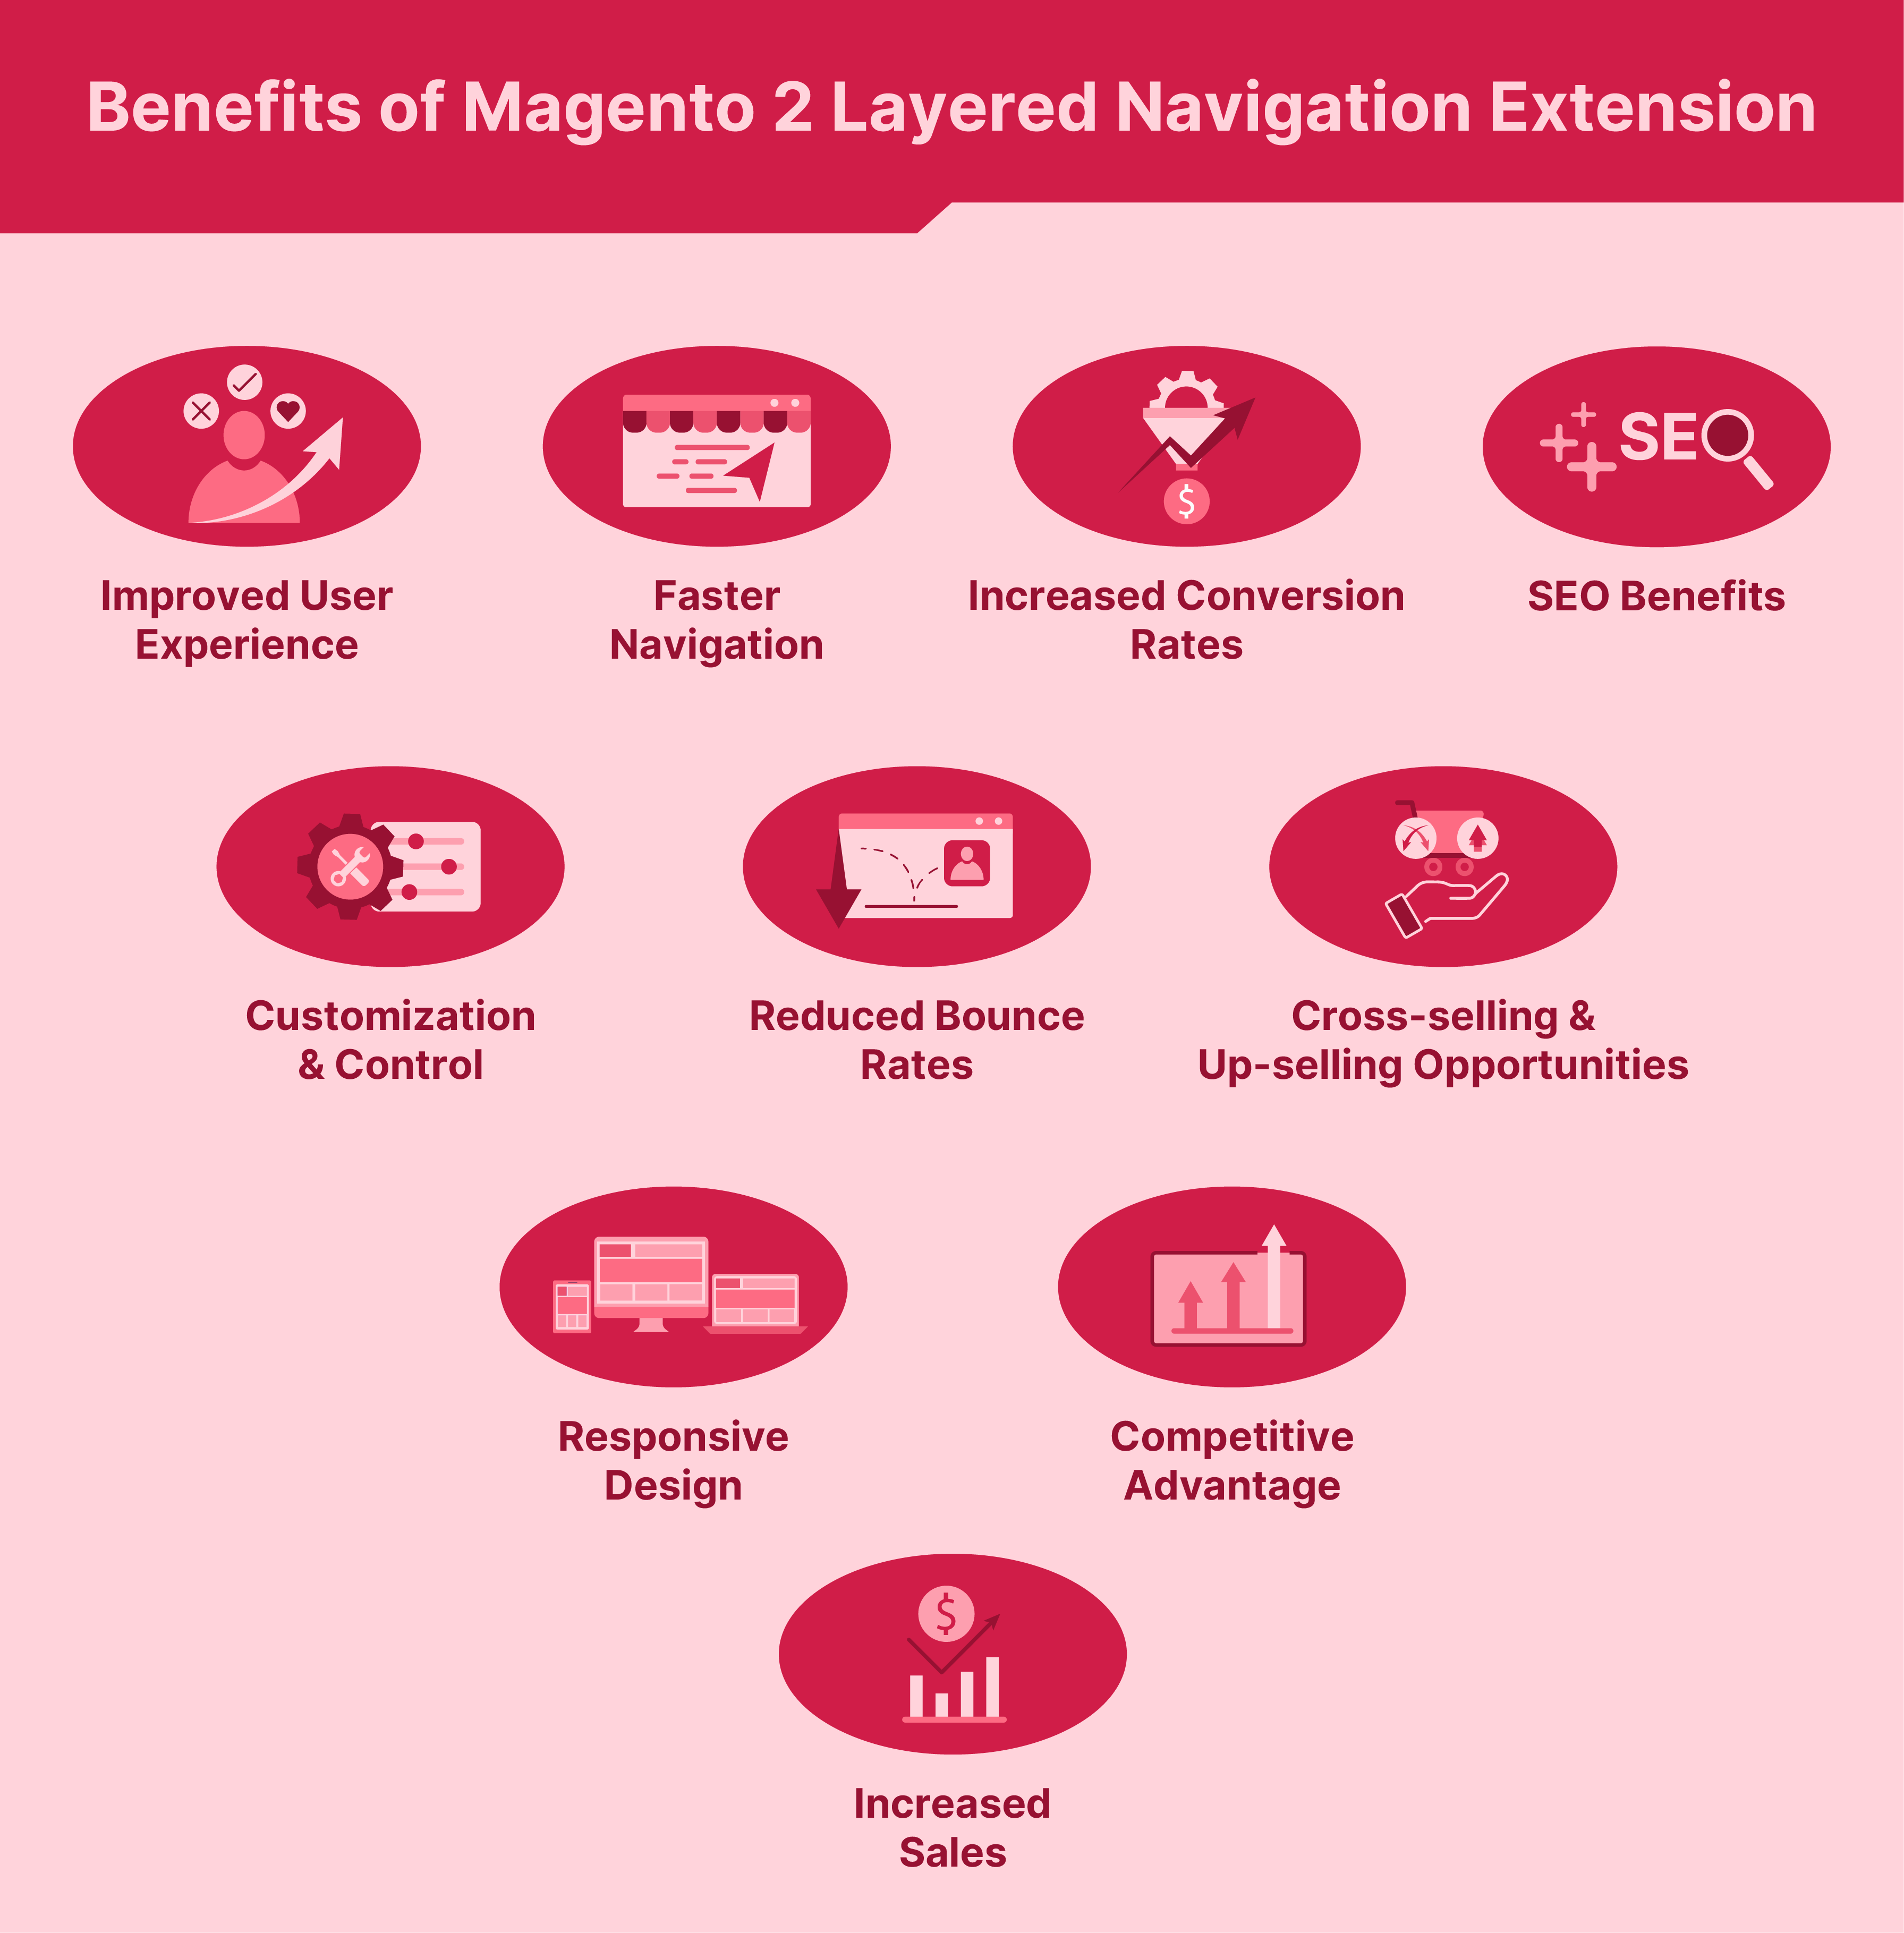 Benefits of Magento 2 Layered Navigation Extension